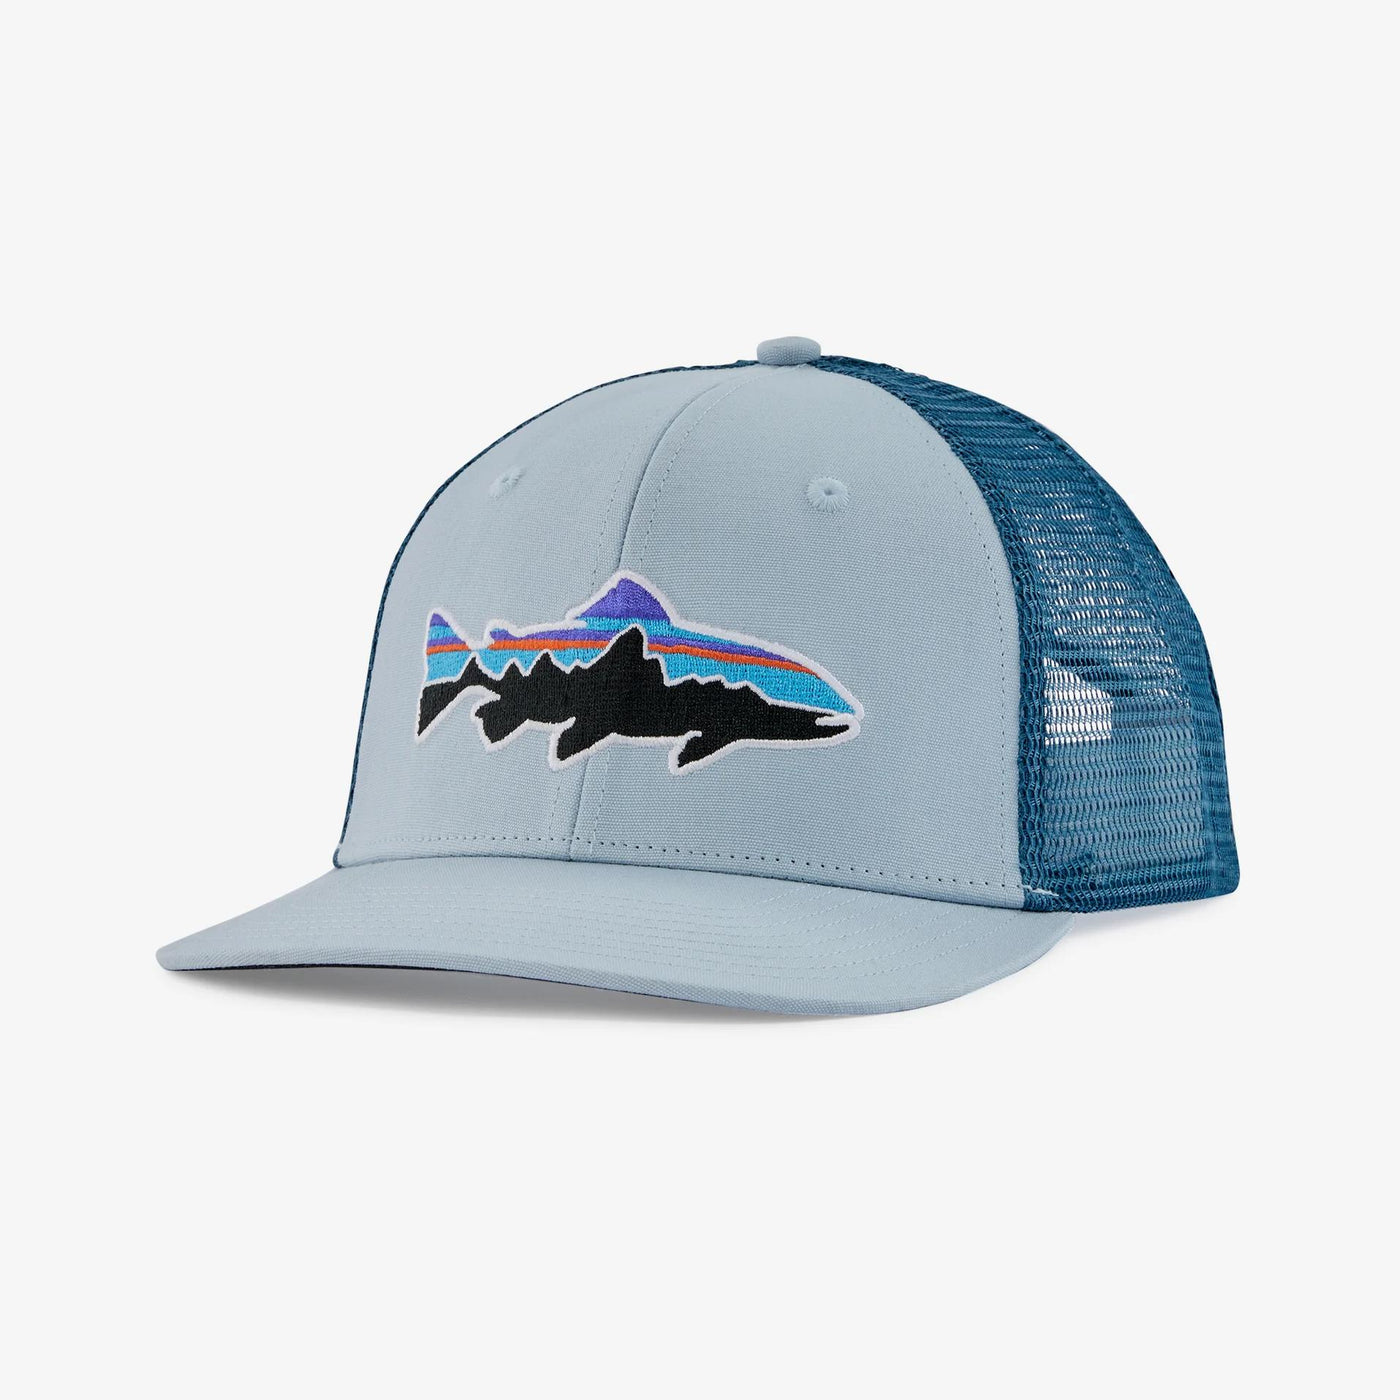 Patagonia Fitz Roy Trout Trucker Hat-Men's Accessories-Steam Blue-Kevin's Fine Outdoor Gear & Apparel